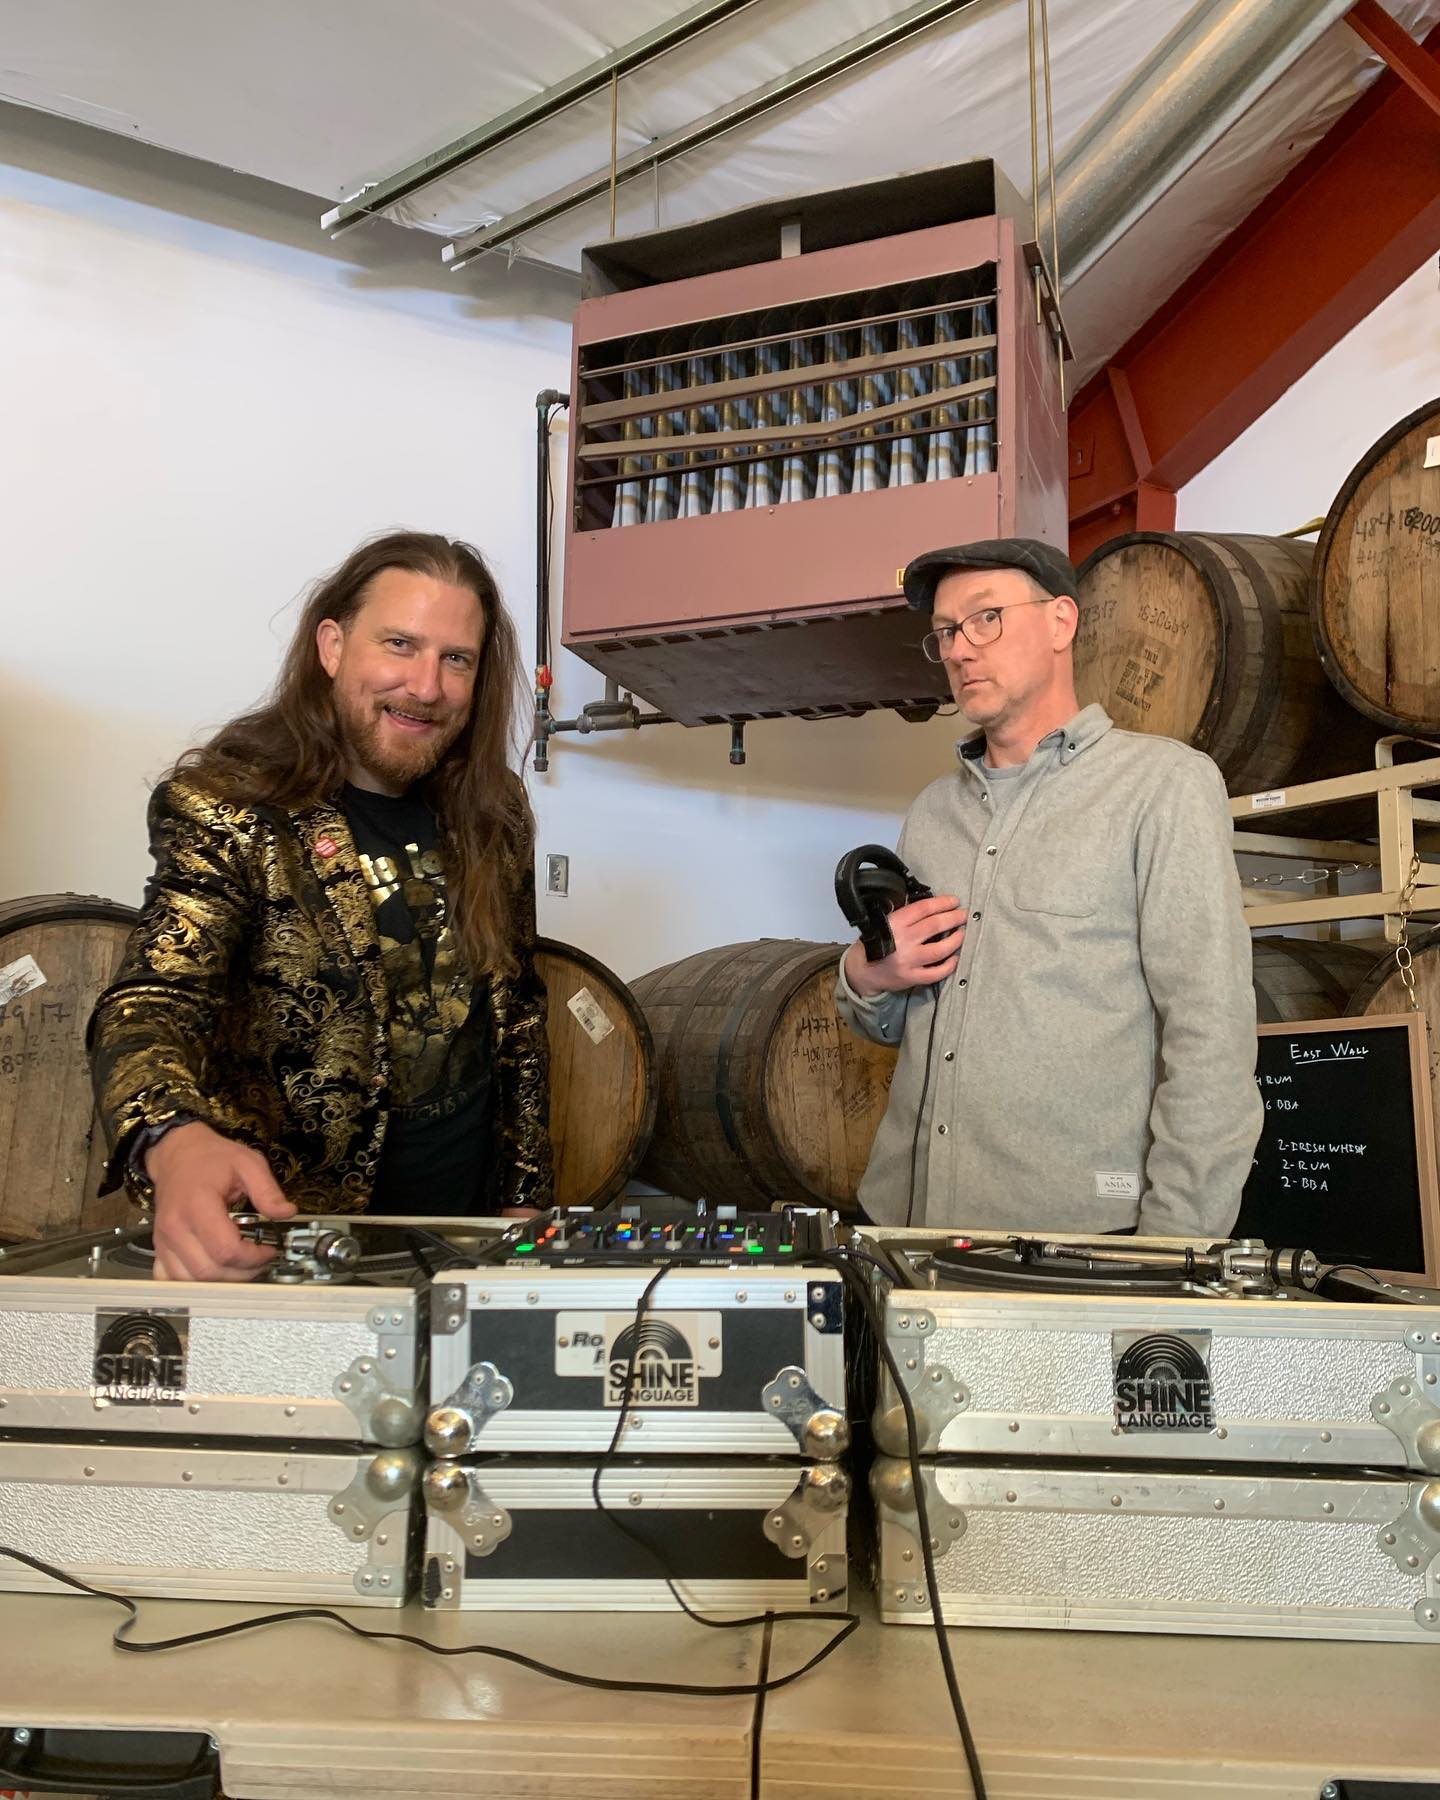 Ben Love and Van Havig, co-founders of Gigantic Brewing will be spinning tunes at its 11th Anniversary Party. (image courtesy of Gigantic Brewing)